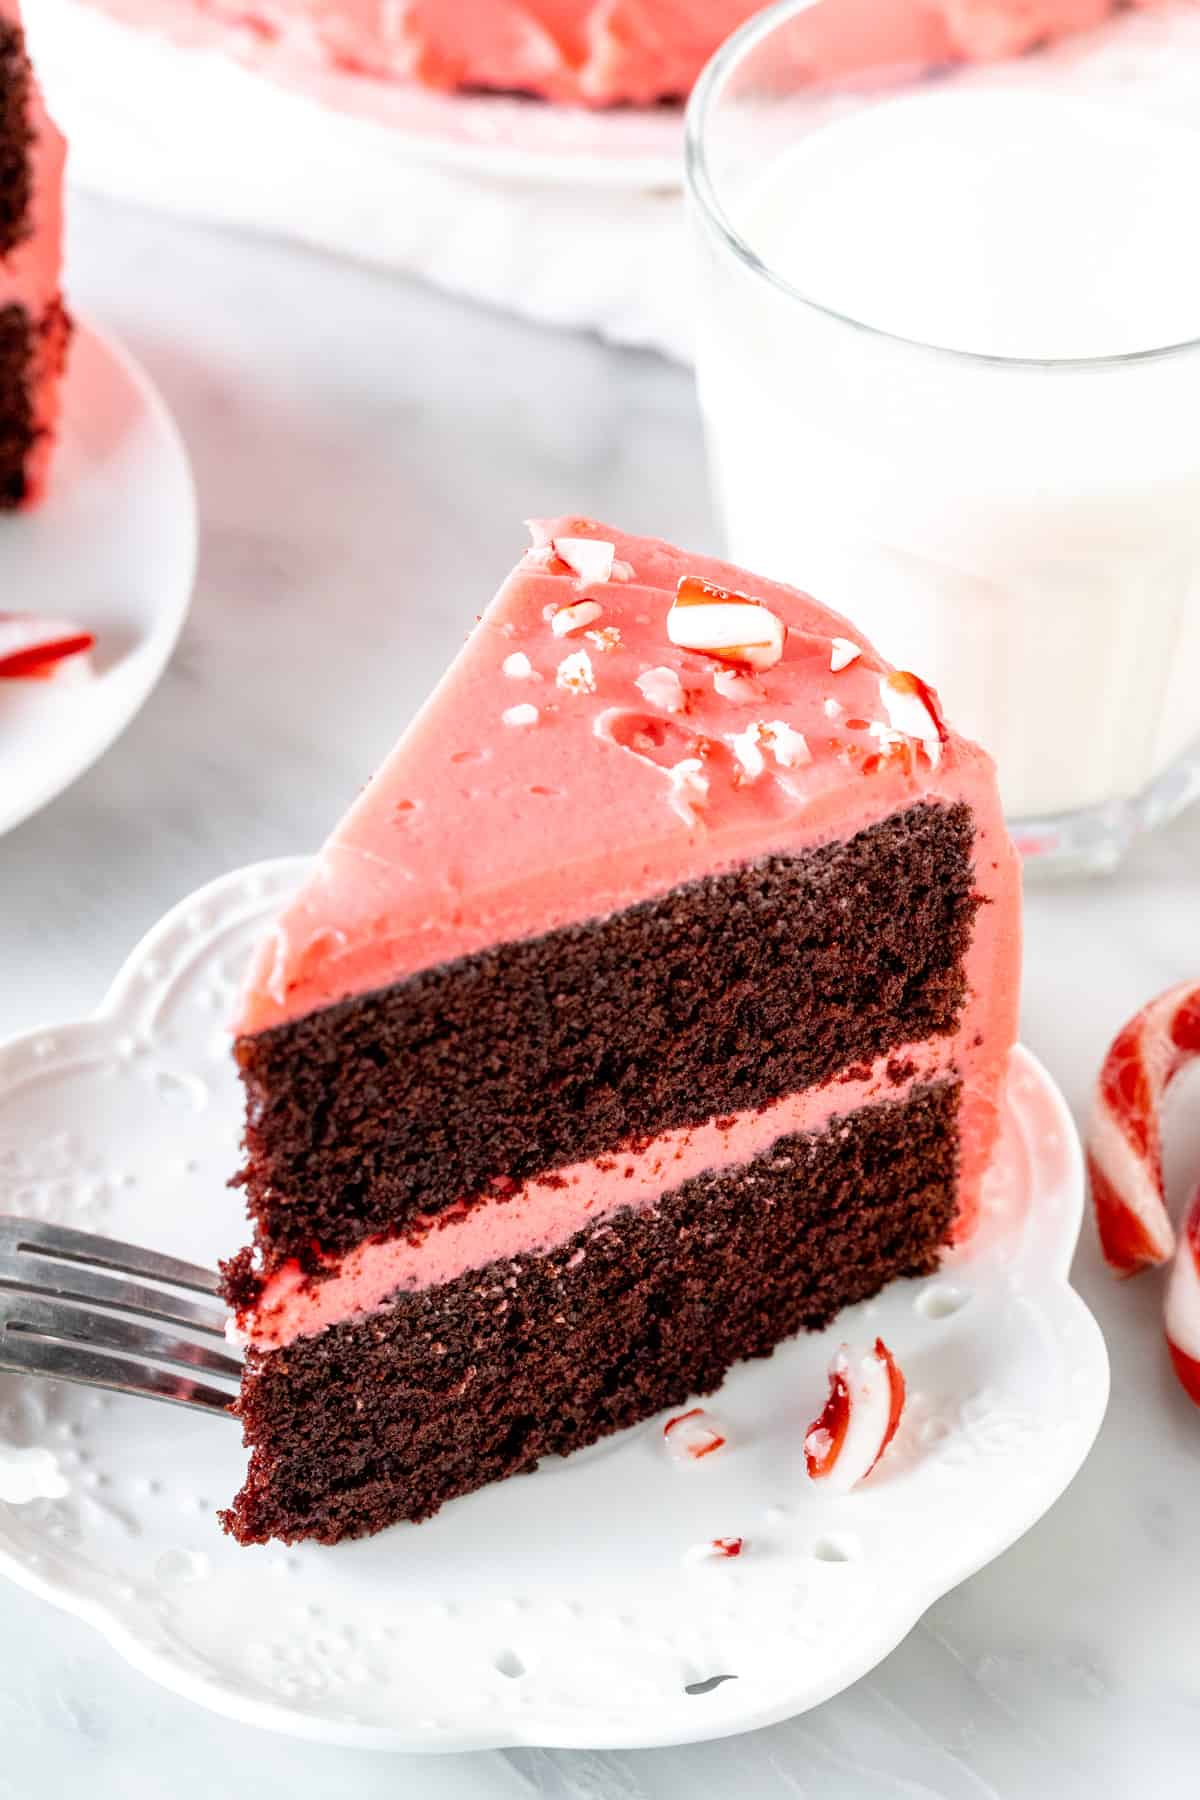 Slice of chocolate peppermint cake with a glass of milk